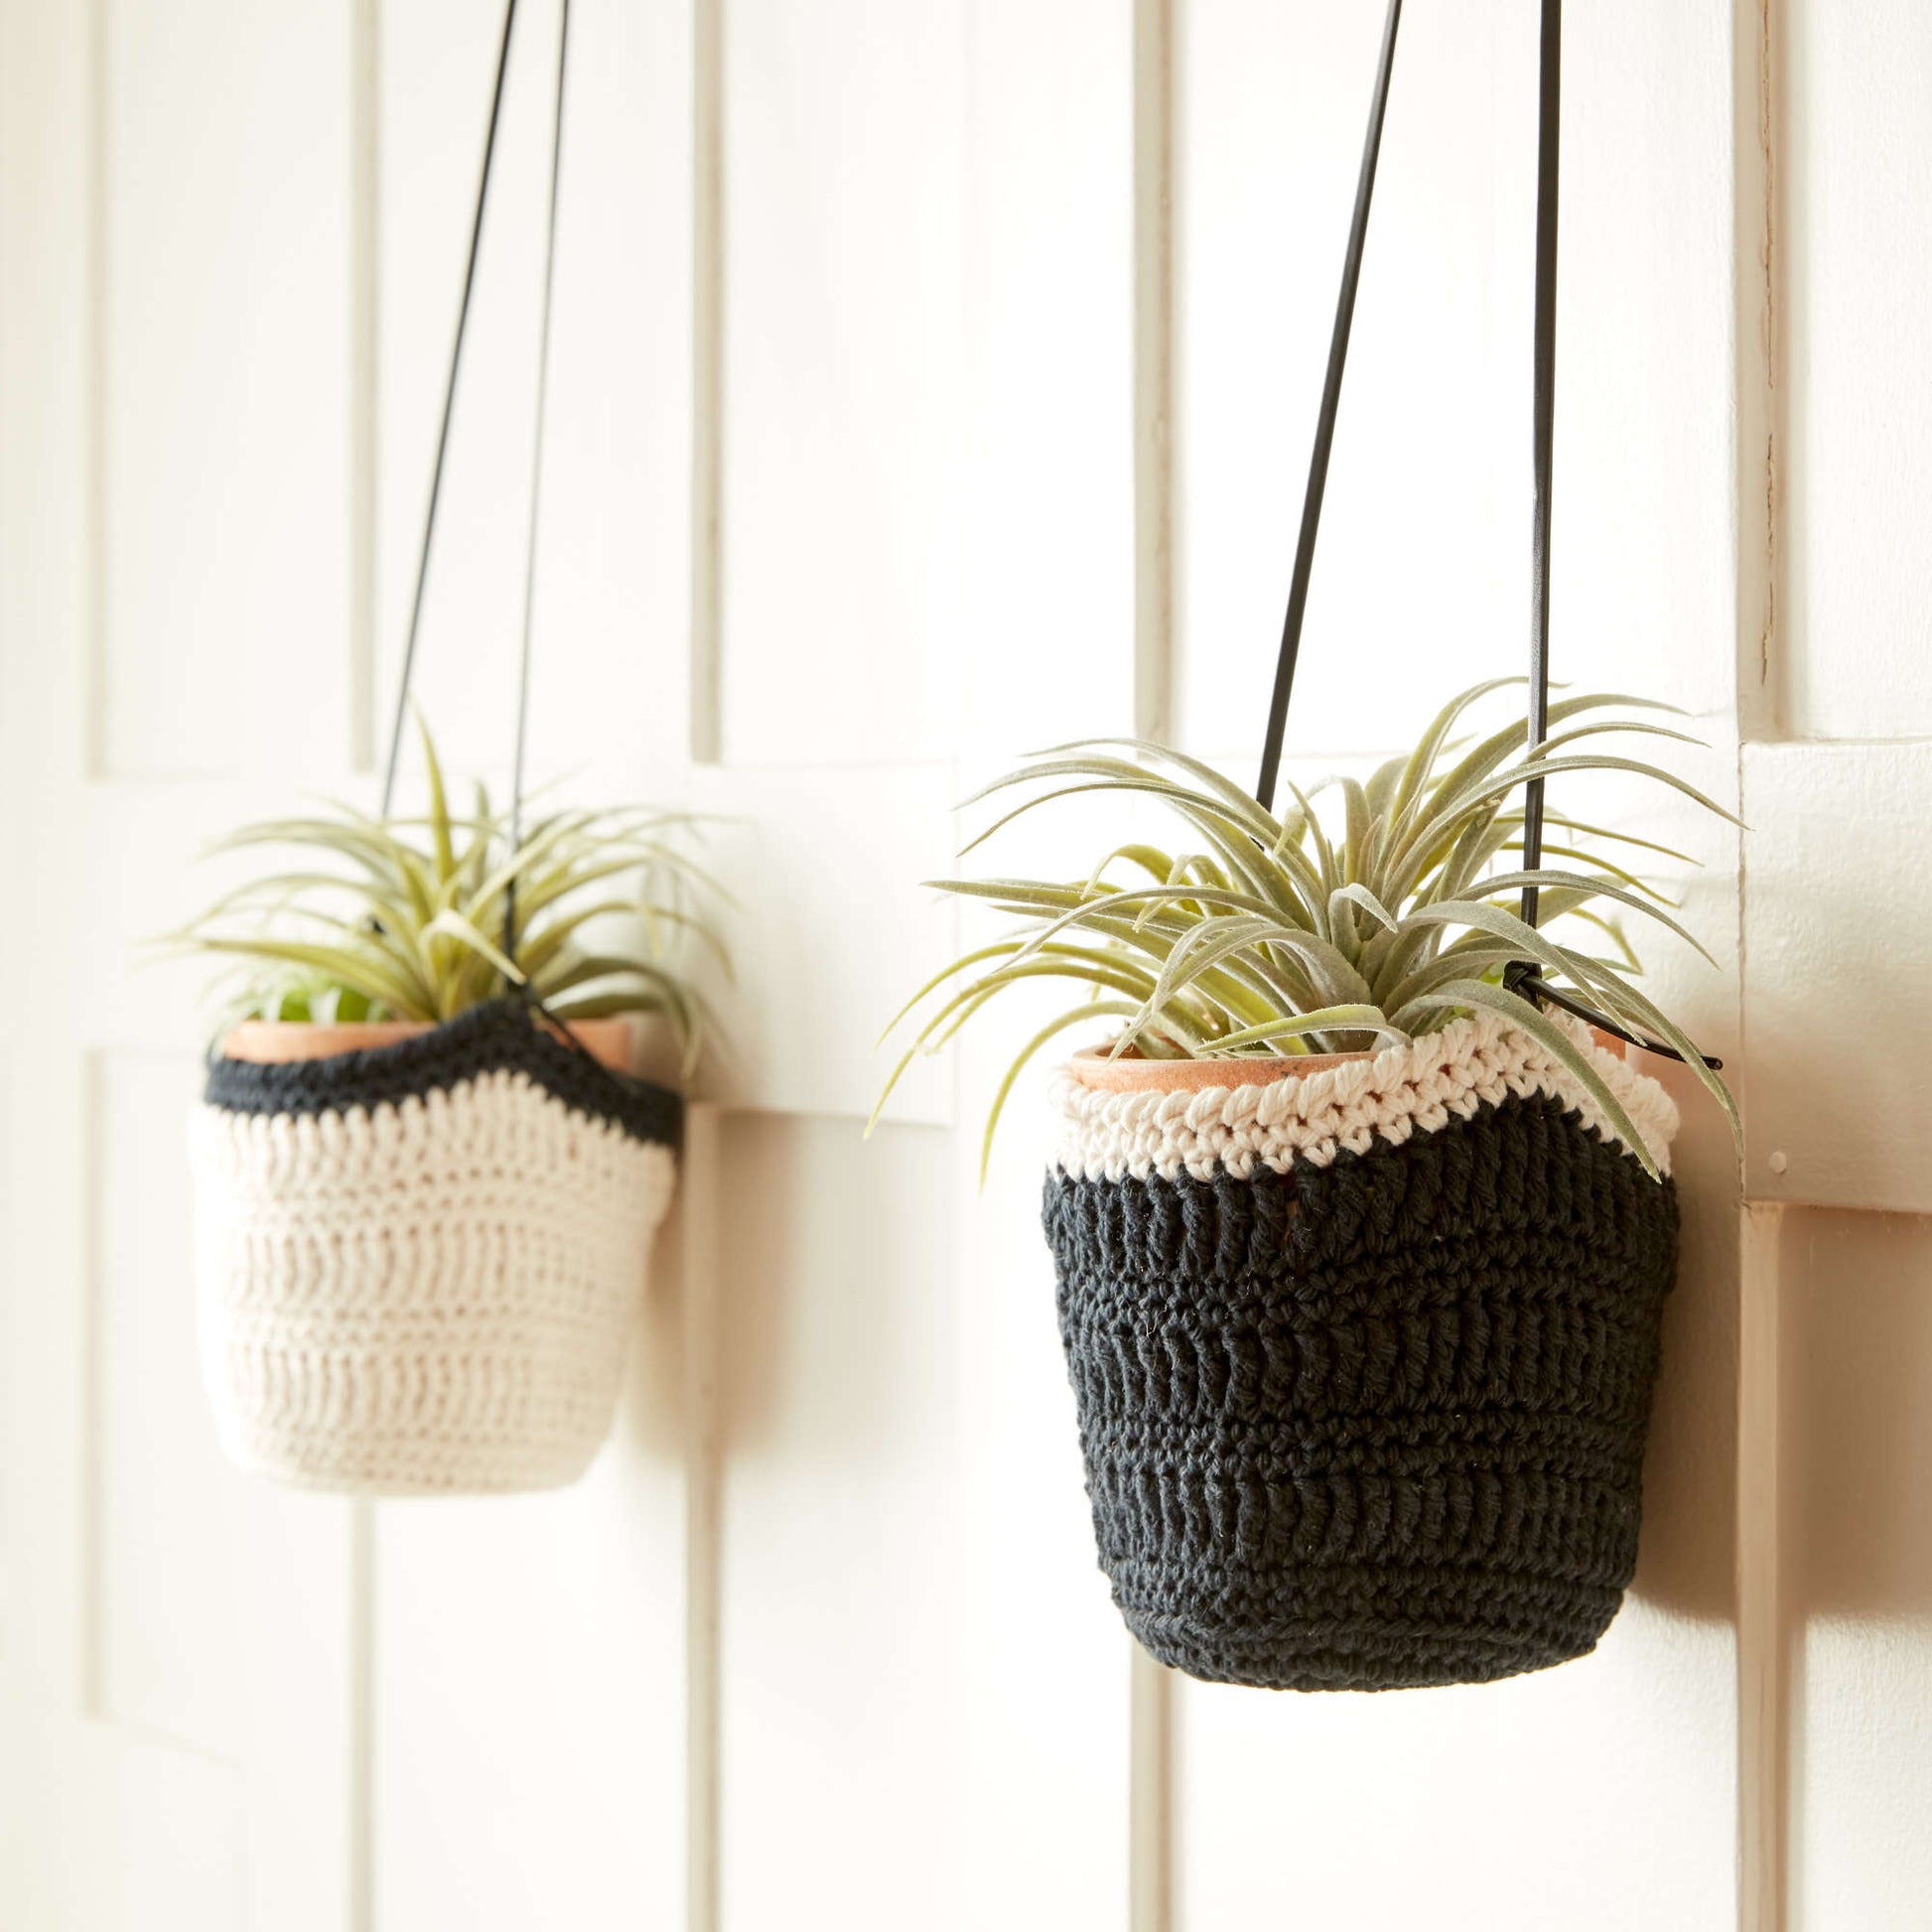 Crochet Kit for Beginners: 4 PCS Hanging Potted Plants, Easy Tutorials